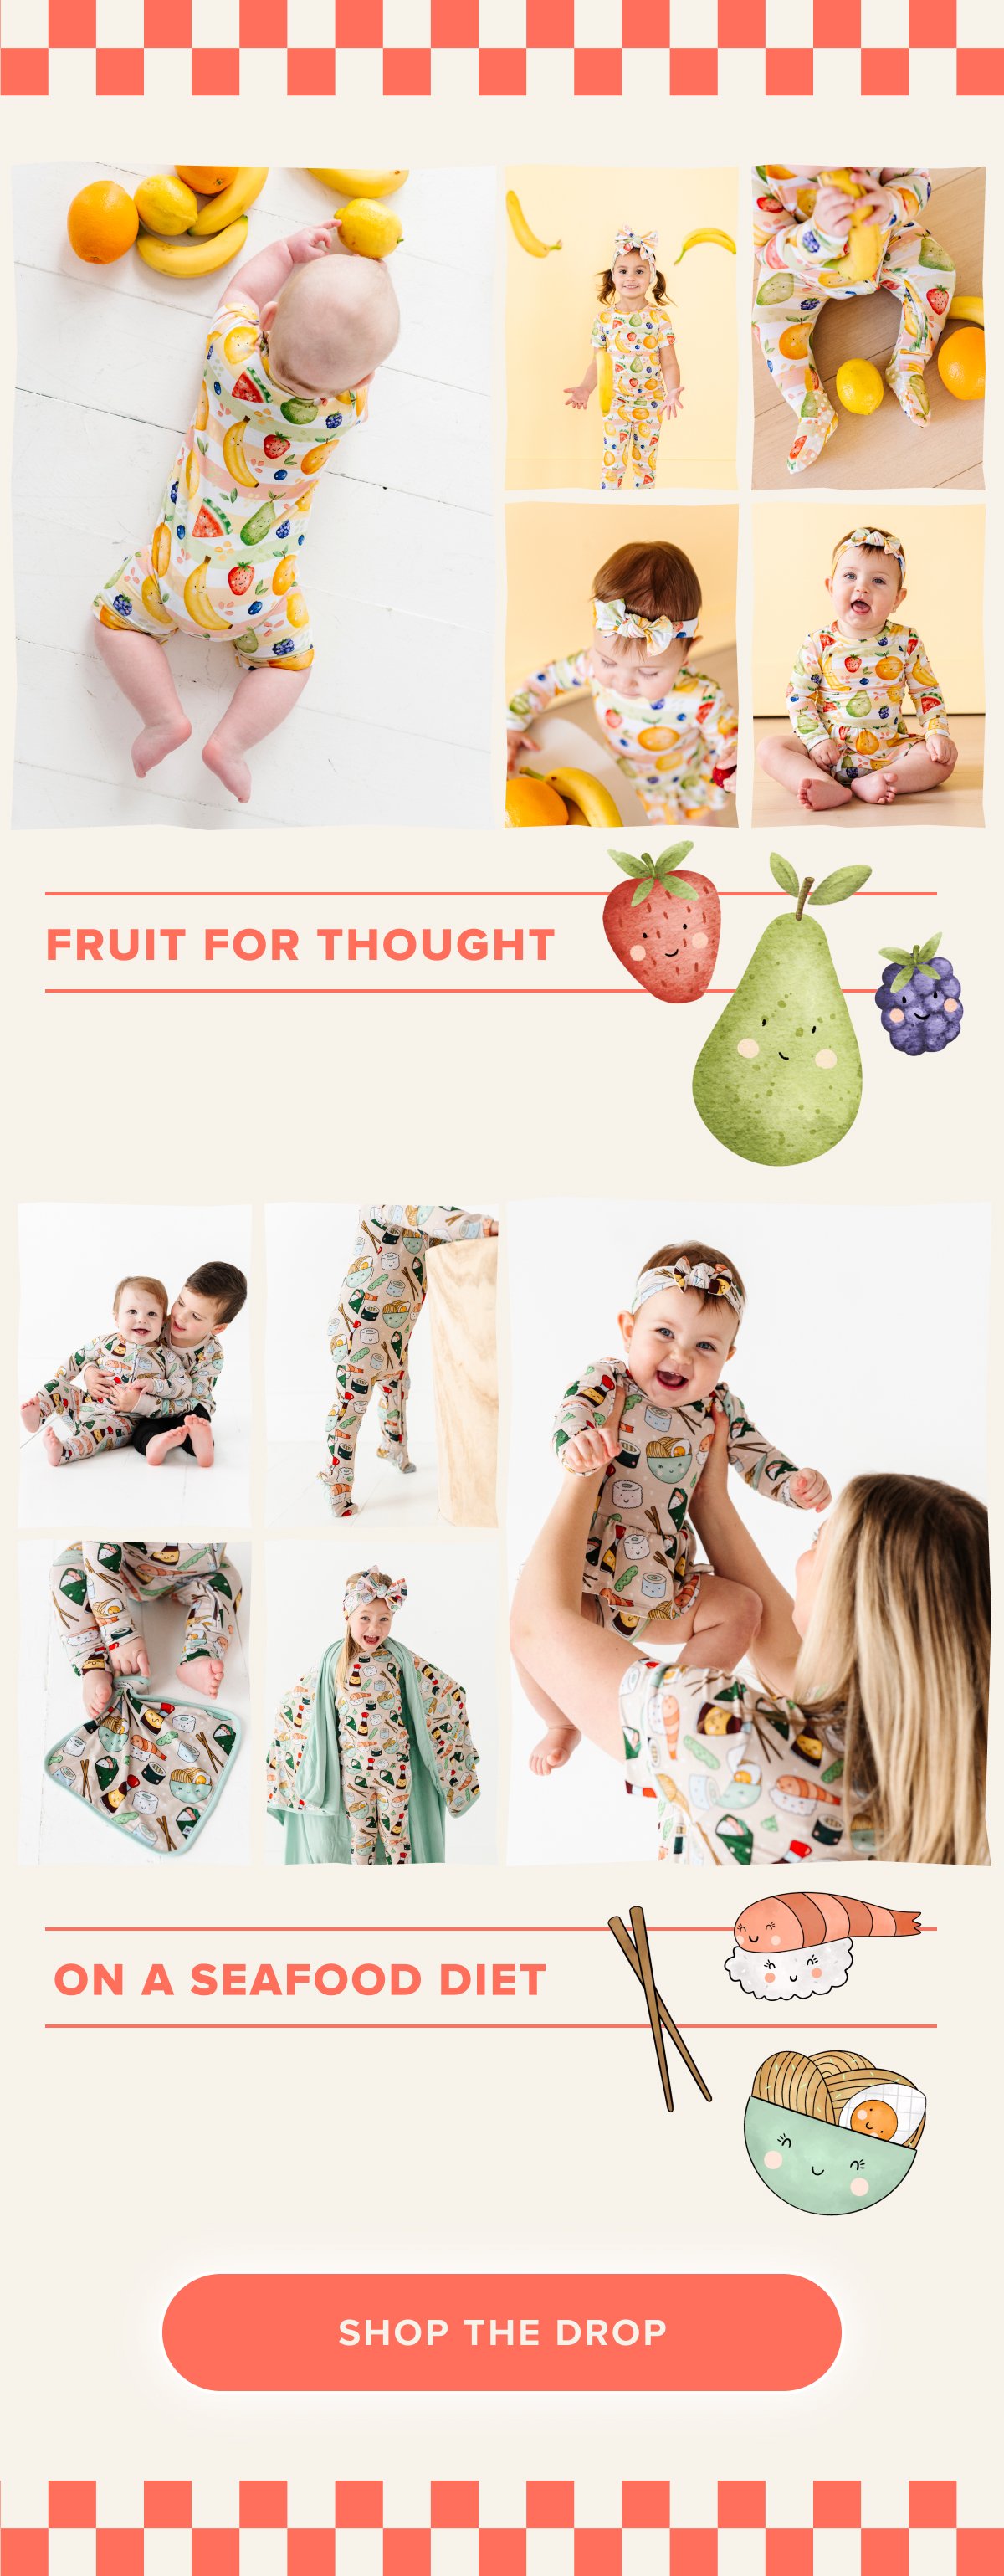 Drop 1 of Food Week is here! Explore juicy, fruit & sushi themed styles that are soy awesome! SHOP THE DROP